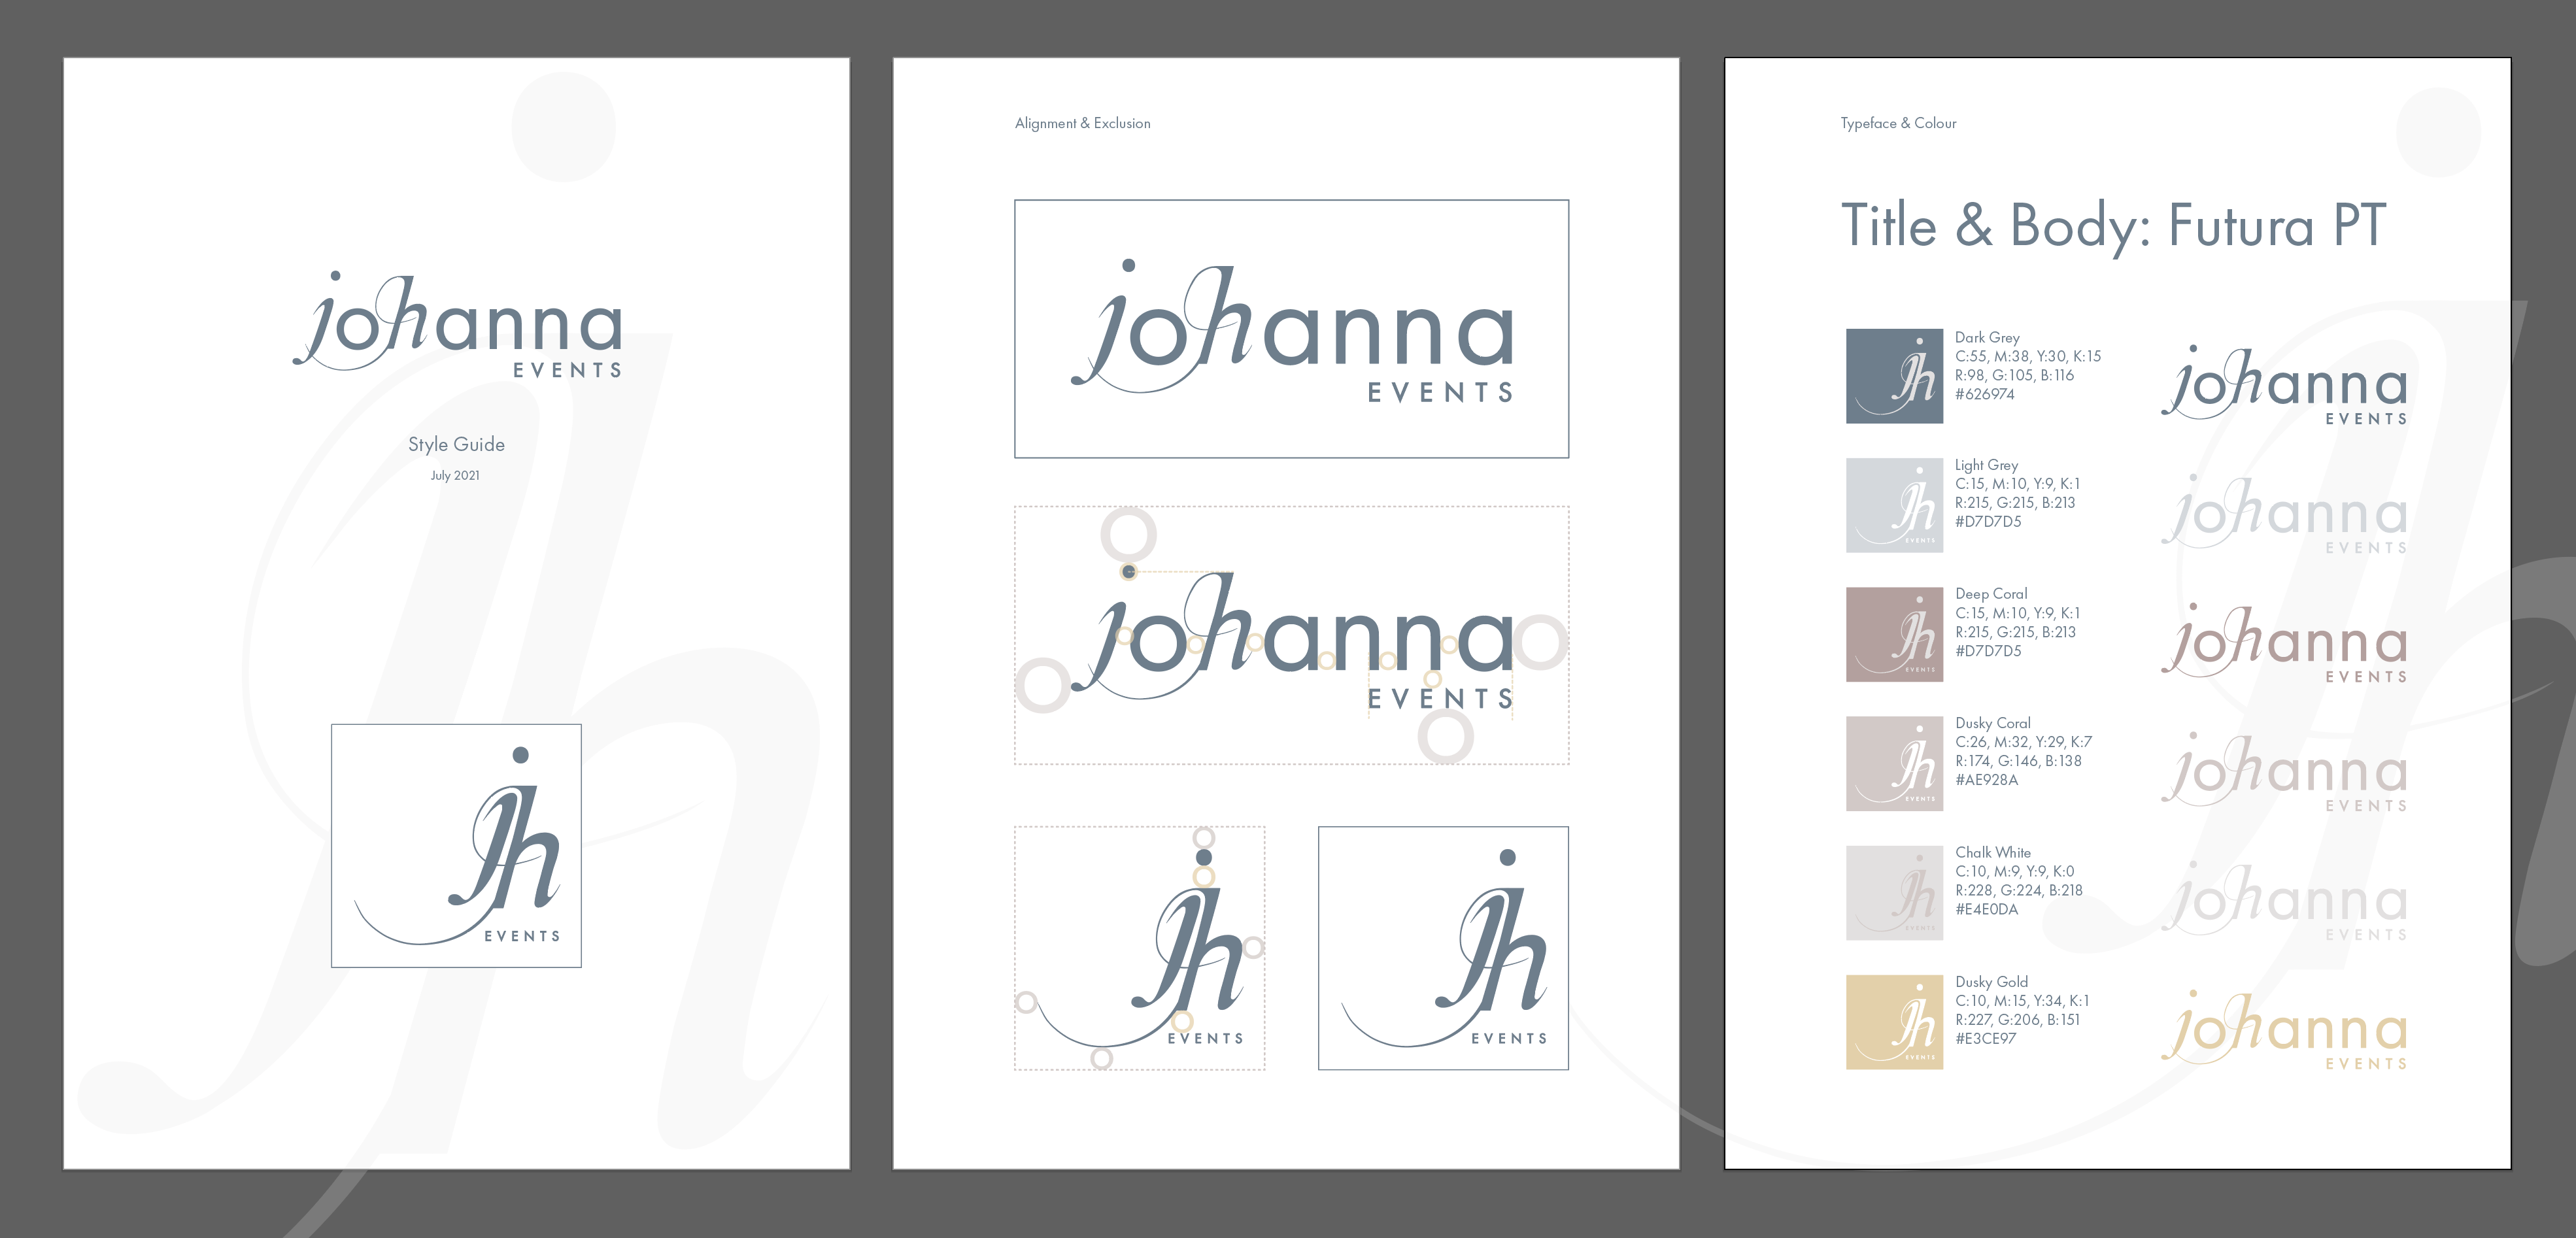 An example of identity style guide provided with a logo design identity from innov8 graphic design.